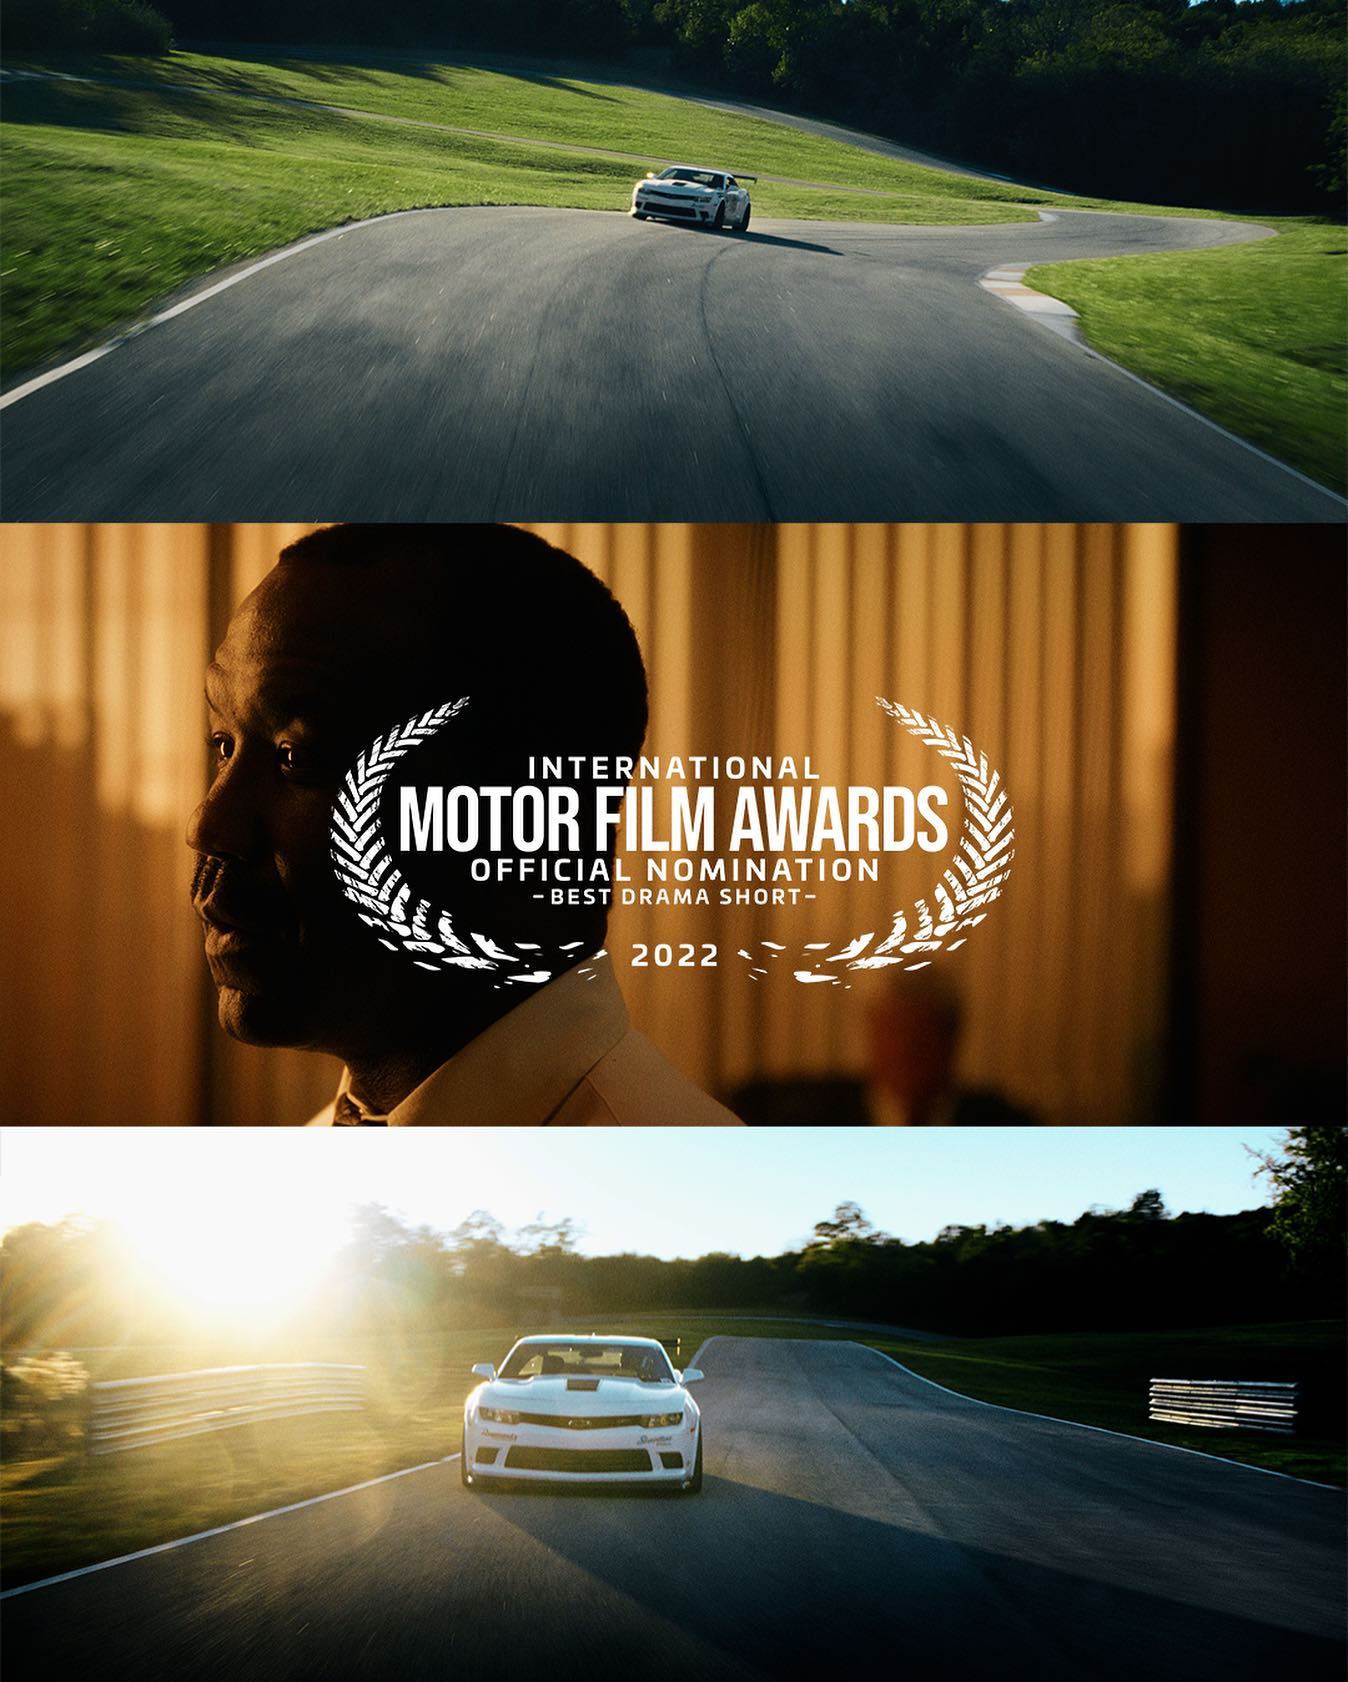 🏎💨 We’re going to London!!! 🏎💨

Defy the Odds was nominated for Best Drama Short at the 2022 @motorfilmawards!

Known as the Oscars for the motoring world, it’s truly a dream to be a part of the International Motor Film Awards. To even be considered alongside some of these other filmmakers whose work I have admired is an incredible honor. 

More than that, I’m just excited that @billlesterracing’s story has been gaining some traction! He’s one of the kindest human beings I’ve ever met and had to overcome incredible adversity to make it as far as he has. His perseverance and drive to follow his dream has been an inspiration to me, and I hope his story can continue to inspire countless others. 

I’m incredibly grateful to all the cast, crew, and friends that helped to pull this project together. Thank you for going on this journey with me 🙏🏻

Prod Co: @gearseven
Exec Producer: @ryan_atenhan @kirkslawek
Producer: @gavin_buckland
Director: @corrygw
Dir of Photography: @quintonbrogan
AD: @courtneybaucom
Art director: @tracieprichard
Set Design & Build: @forthouston @gmorrrris
AC: @jacobcushman @bennetthimself
2nd AC: @quinlanulysses
Gaffer: @treager
Key Grip: @film_dope
Grip: @jacobhart90117
Grip Specialist: @billygomes79
Precision Driving: @shiftdynamics.co
Camera Car Precision driver: @wilson_precision
Arm Op: @yeahsammyshoots
Sound: @cachoalonso Production Manager: @codyfisherwilliams
Studio Manager: @skylargalayda
Car Rotisserie Fabricator: @coffeyfab

Precision Drivers: @kenthwaits
LED Volume: @arcstudios.tv
LED Volume content: @meptik
LED Volume Technical Director: @jtwylie
VFX Supervisor/Grip Swing: @tucurly4u

Acted and performed by: 
@bradfordhaynes12
Tim Mercer
Austin Buck
Based on Bill Lester’s memoir, “Winning in Reverse” 
@billlesterracing
@serendipitylit

POST PRODUCTION: Editor: @corrygw
Colorist: @quintonbrogan
Musical Score: @jonnymendez__
VFX: @tucurly4u
Title Design: @gavin_buckland
Sound Design: Ryan Pribyl

#WinninginReverse #BillLester #BillLesterRacing #SerendipityLit #motorfilmawards2022